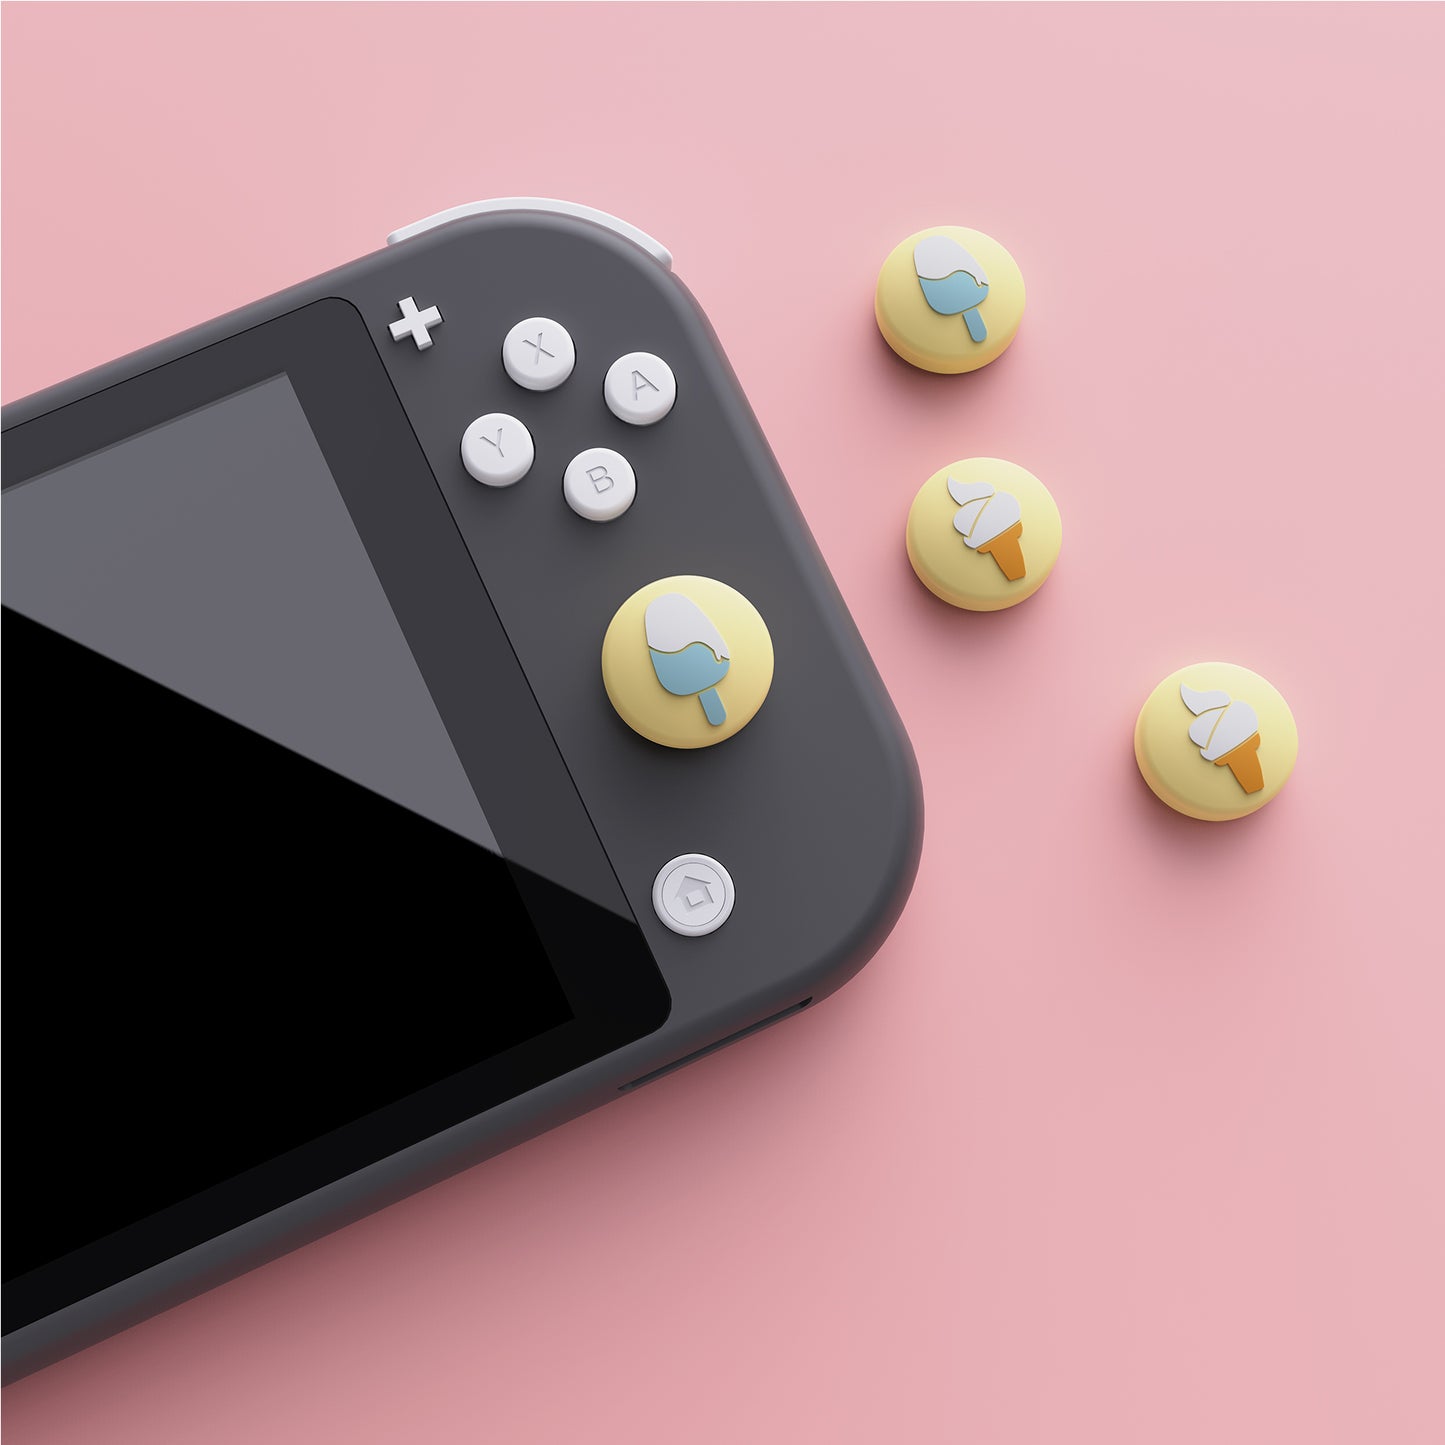 PlayVital Ice Cream Cute Switch Thumb Grip Caps, Joystick Caps for Nintendo Switch Lite, Silicone Analog Cover Thumbstick Grips for Switch OLED Joycon - Cream Yellow - NJM1107 playvital